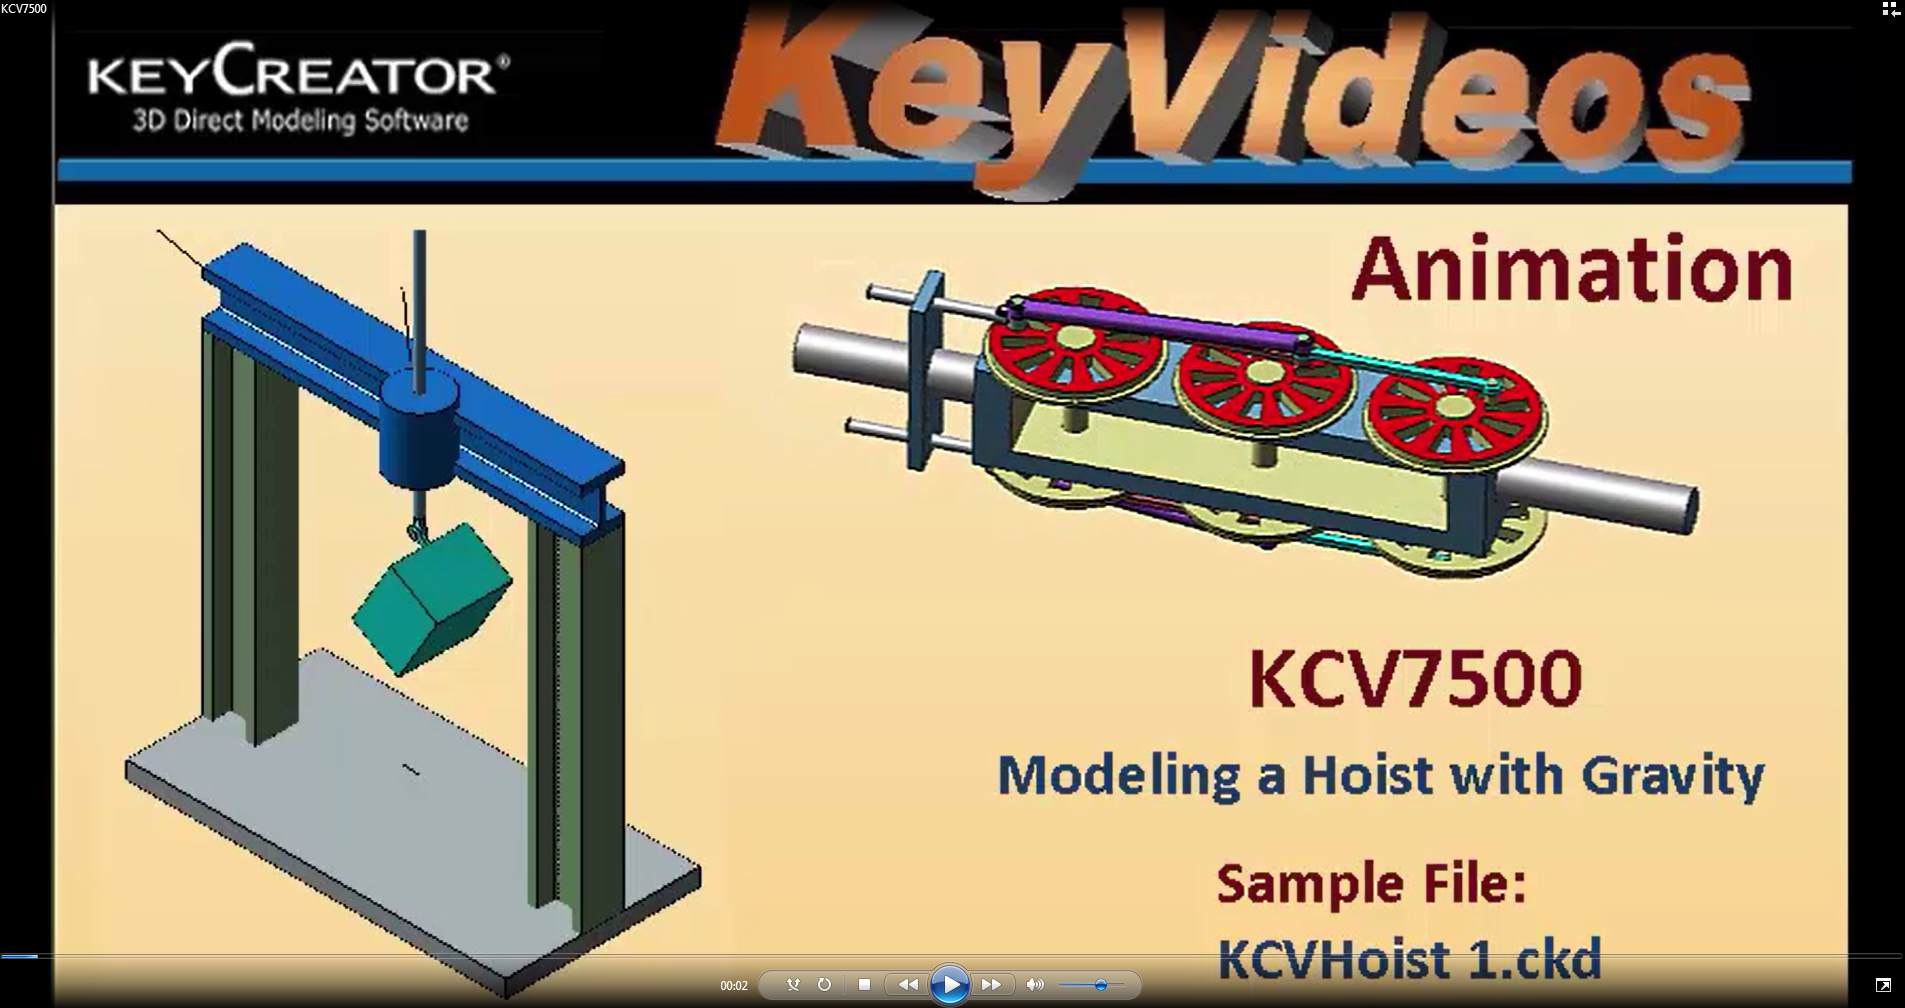 Animation: 3D CAD Modeling A Hoist With Gravity